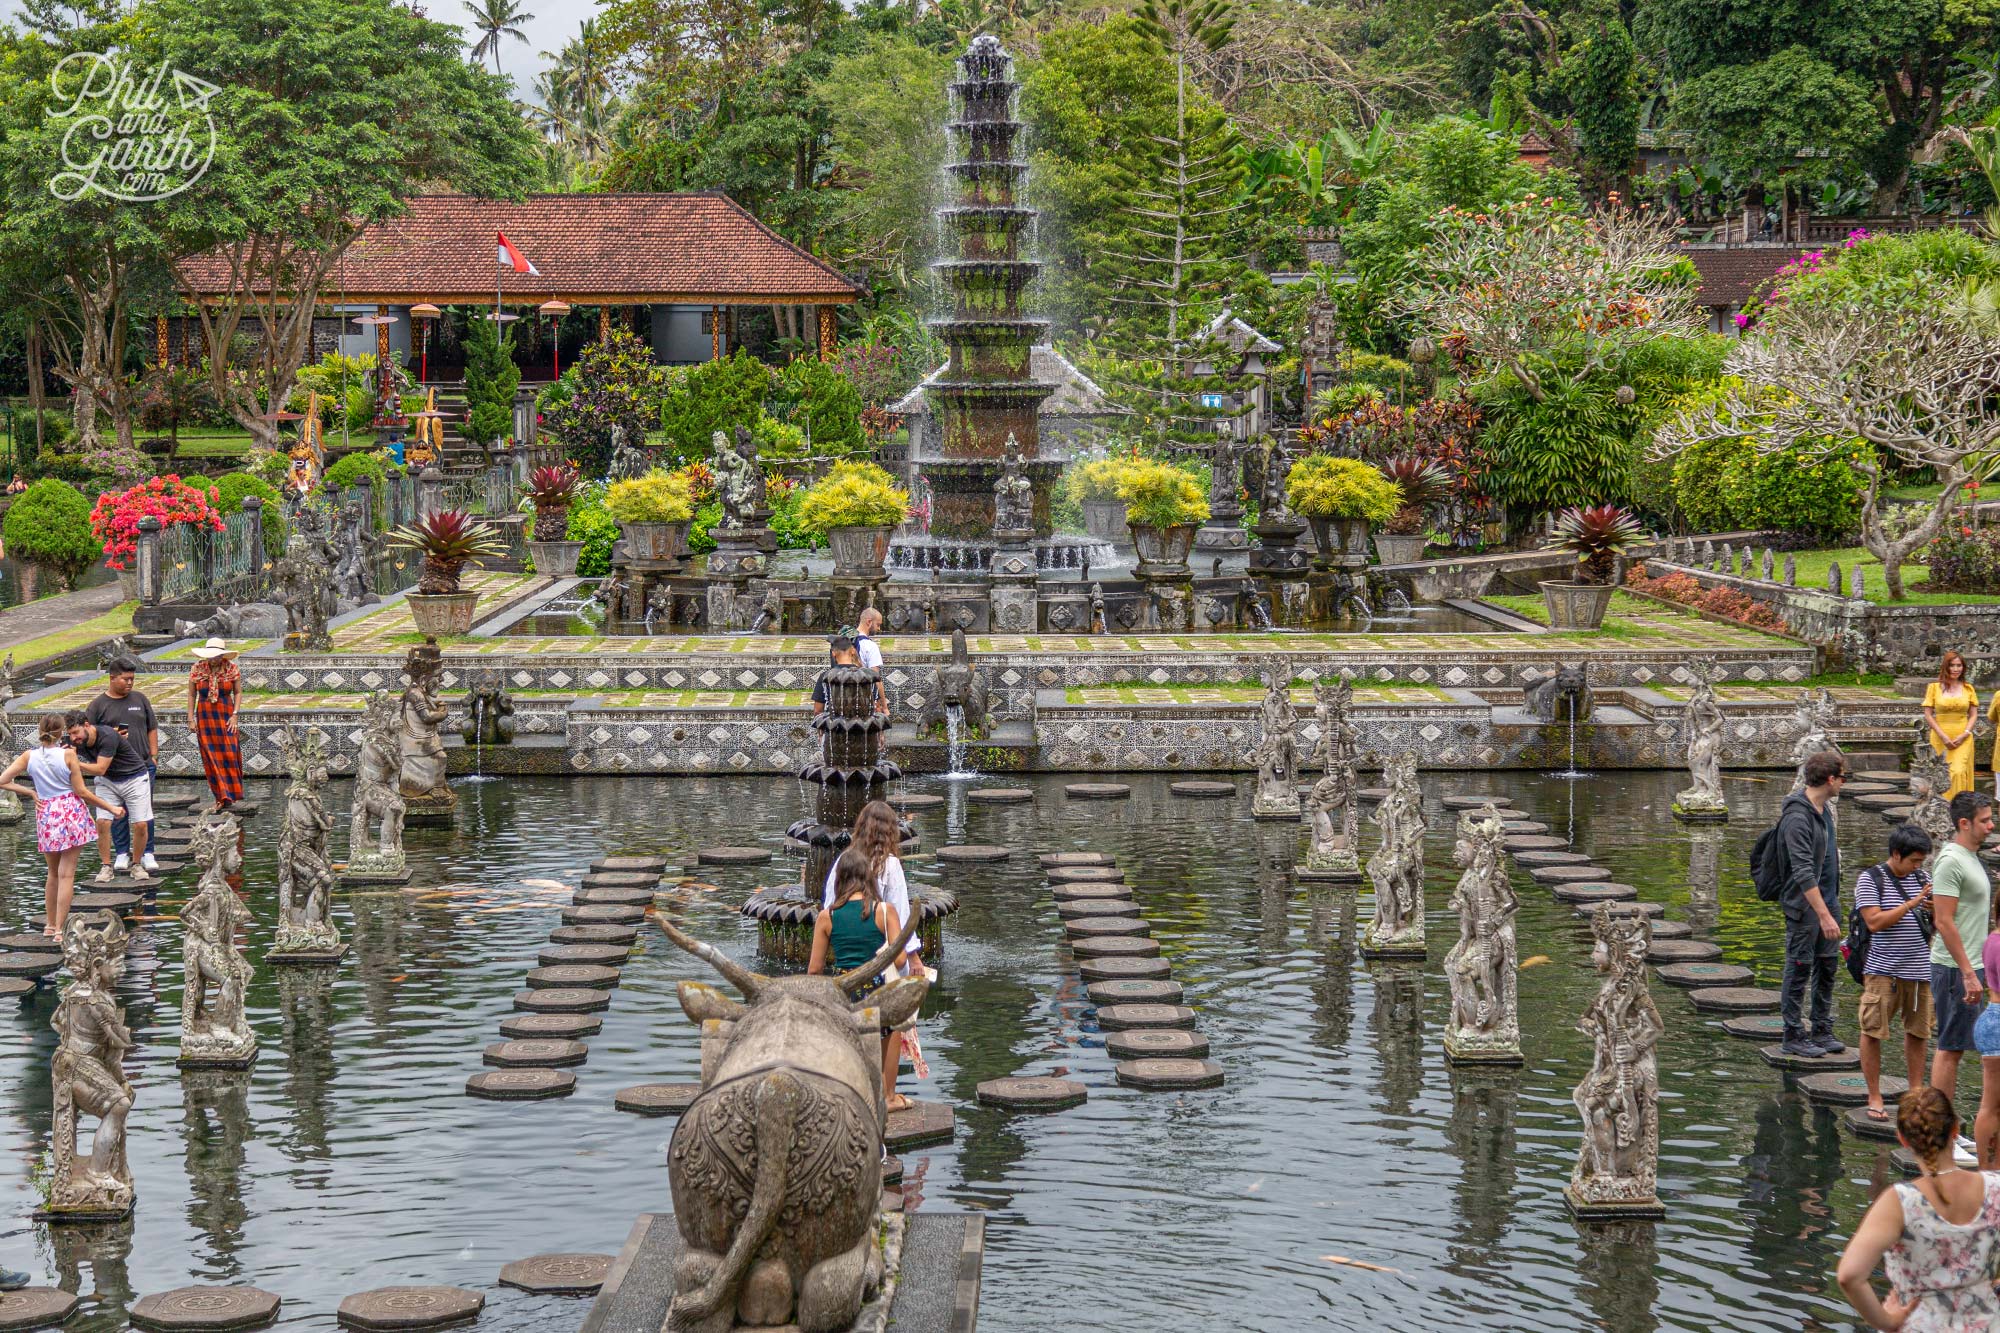 What Bali Is Famous for?